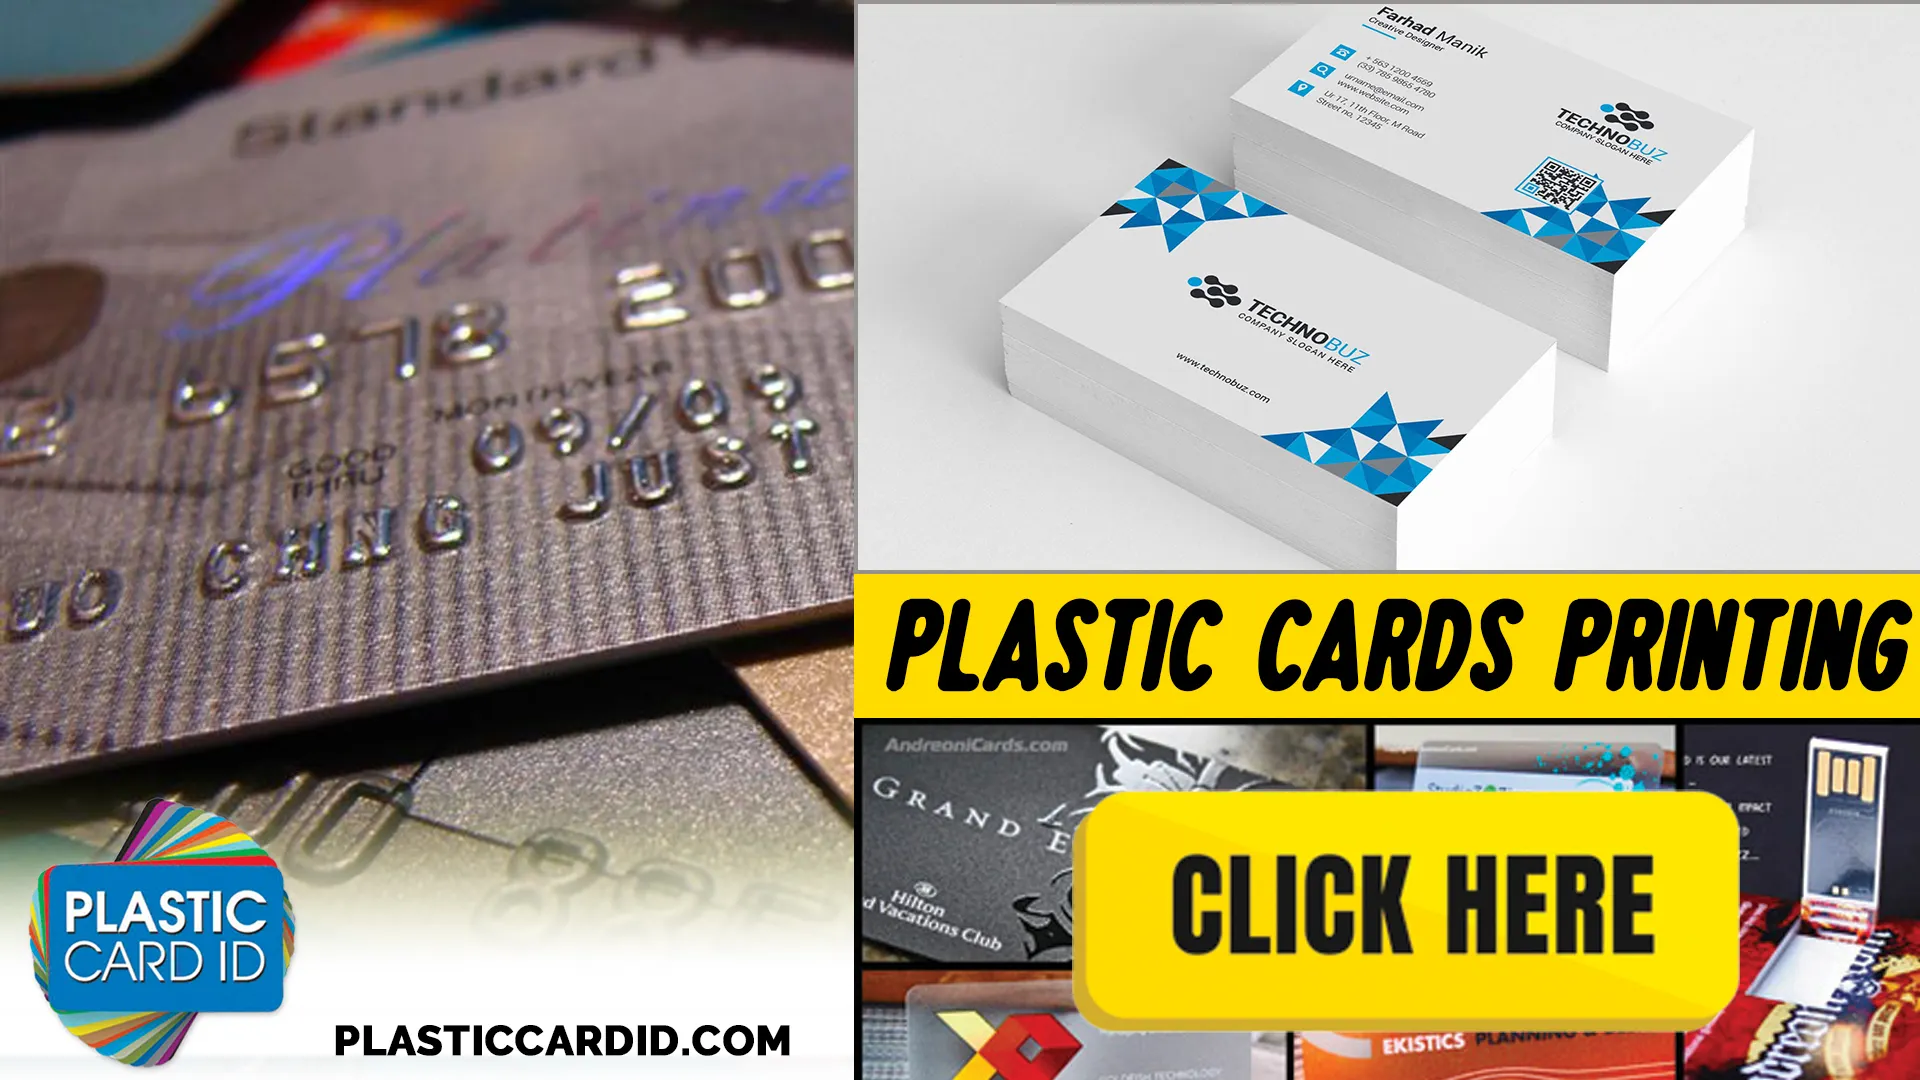 Customizable Options Galore at Plastic Card ID
